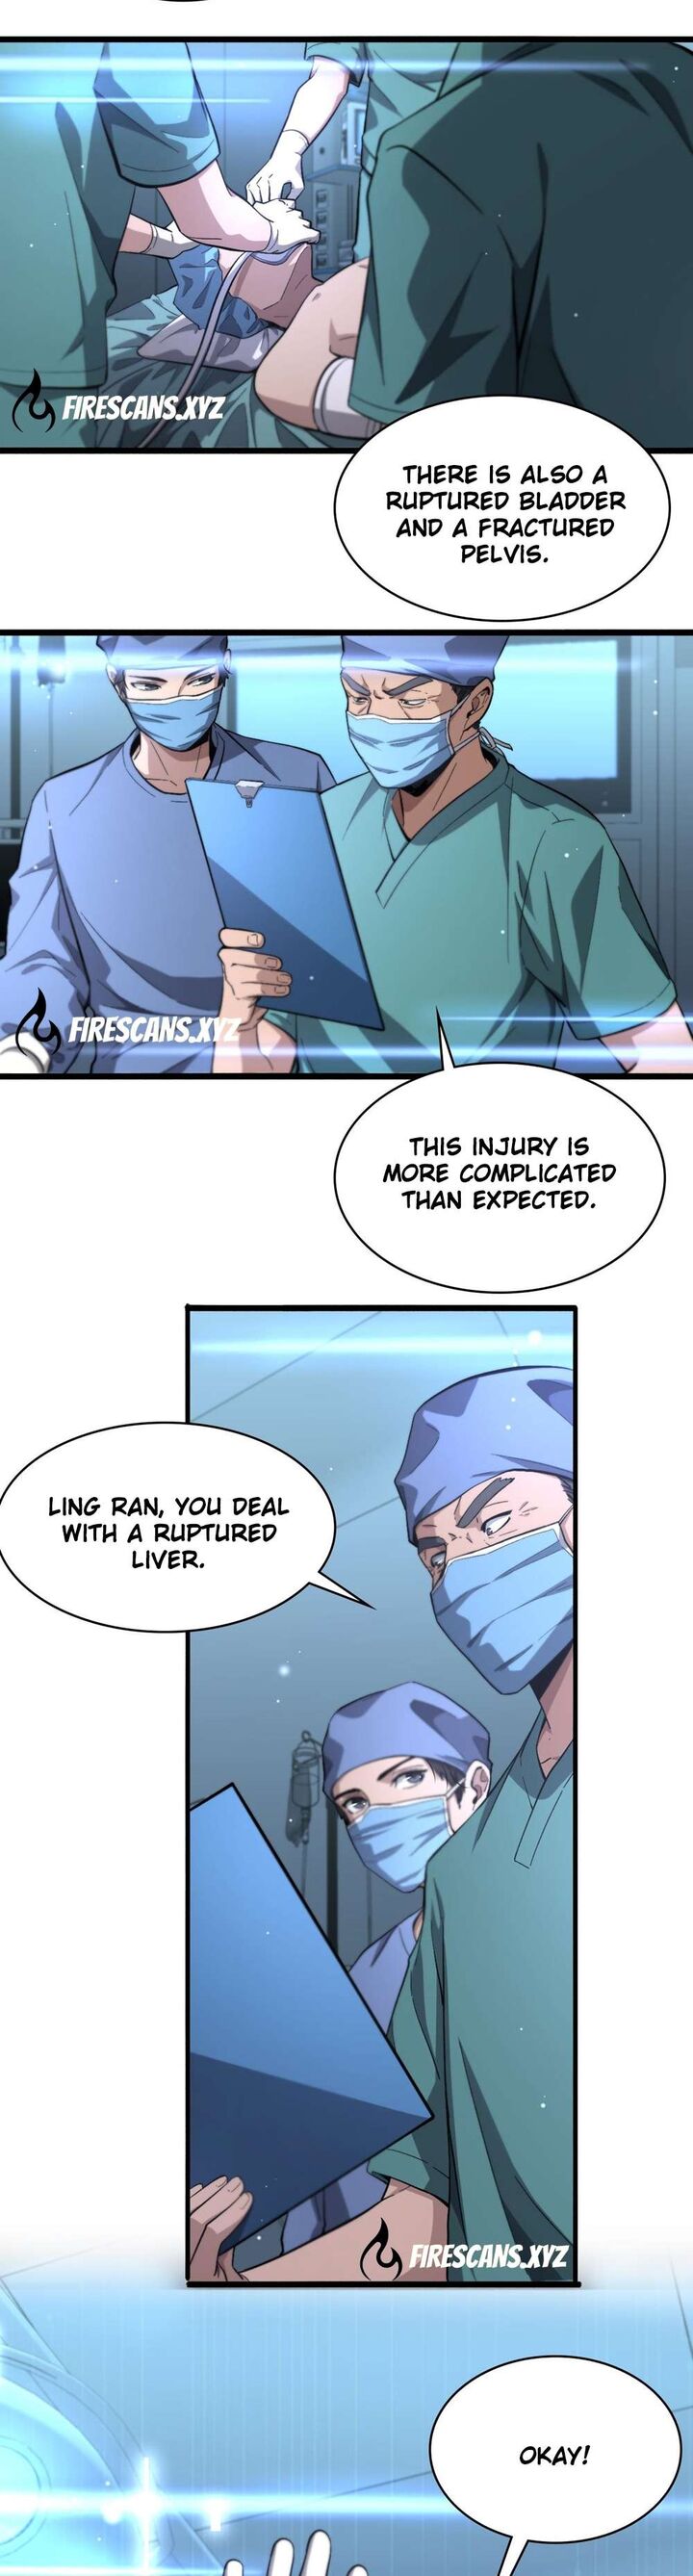 great_doctor_ling_ran_171_3